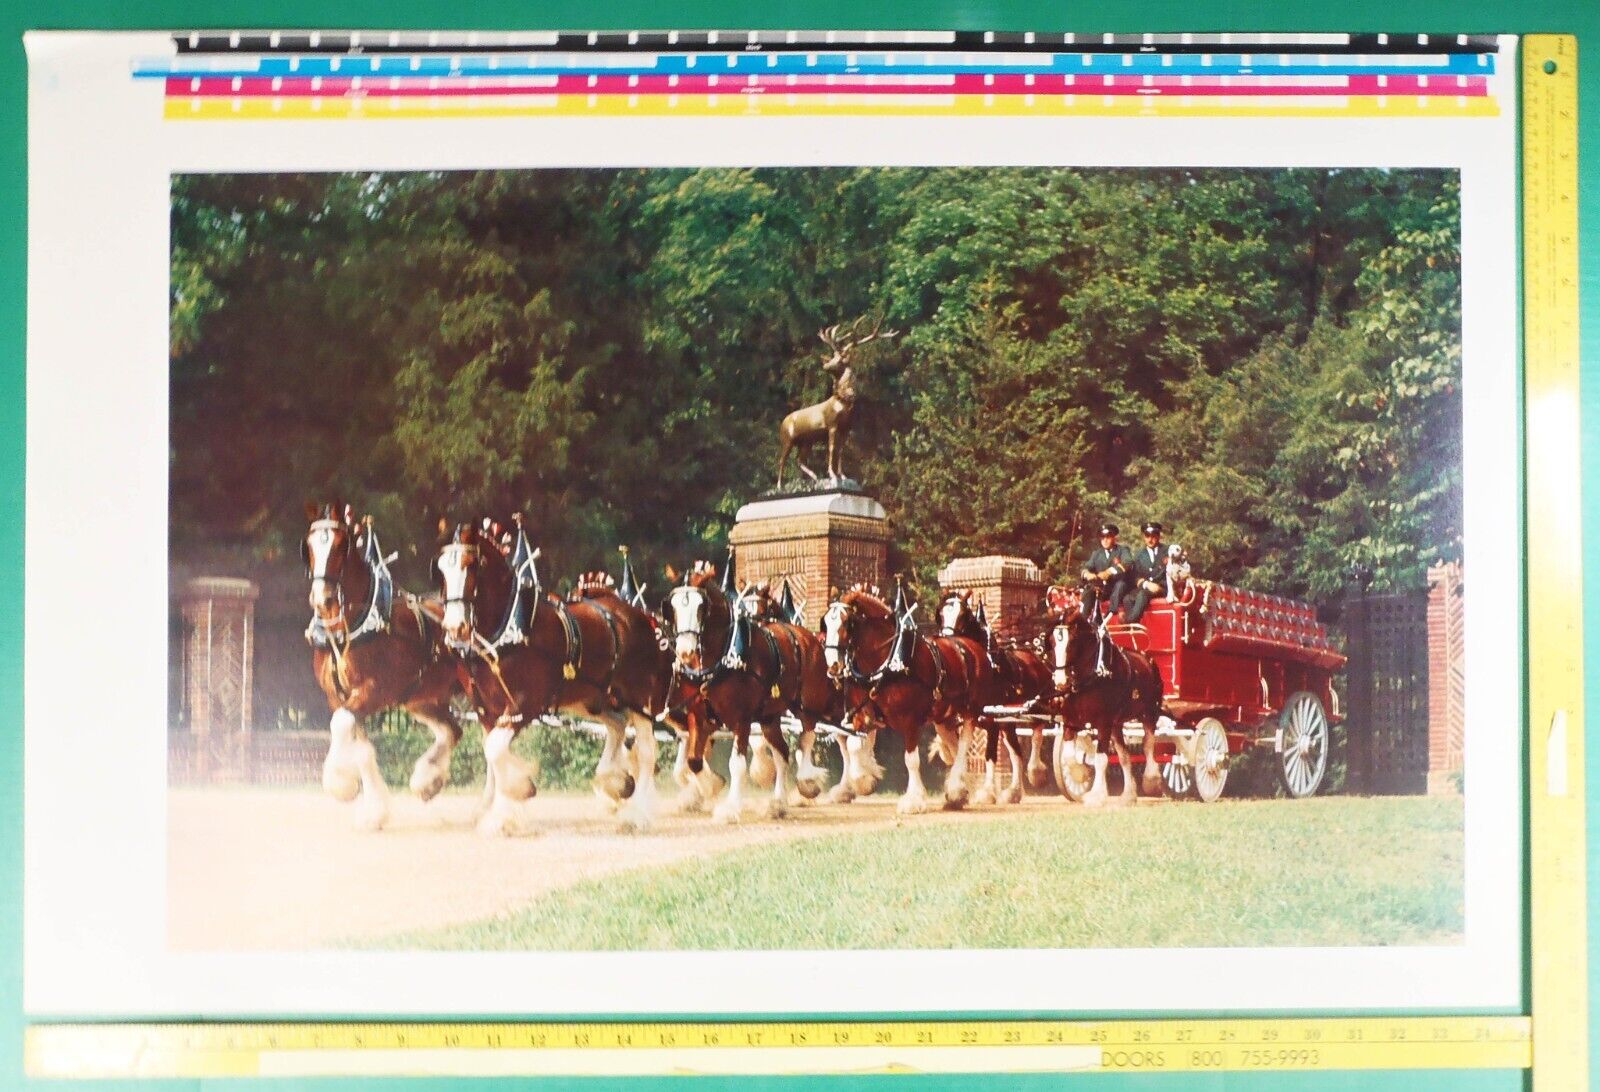 1970s 35x23 UNCUT Photo of BUDWEISER Beer Wagon Dalmatians Clydesdales at Gate